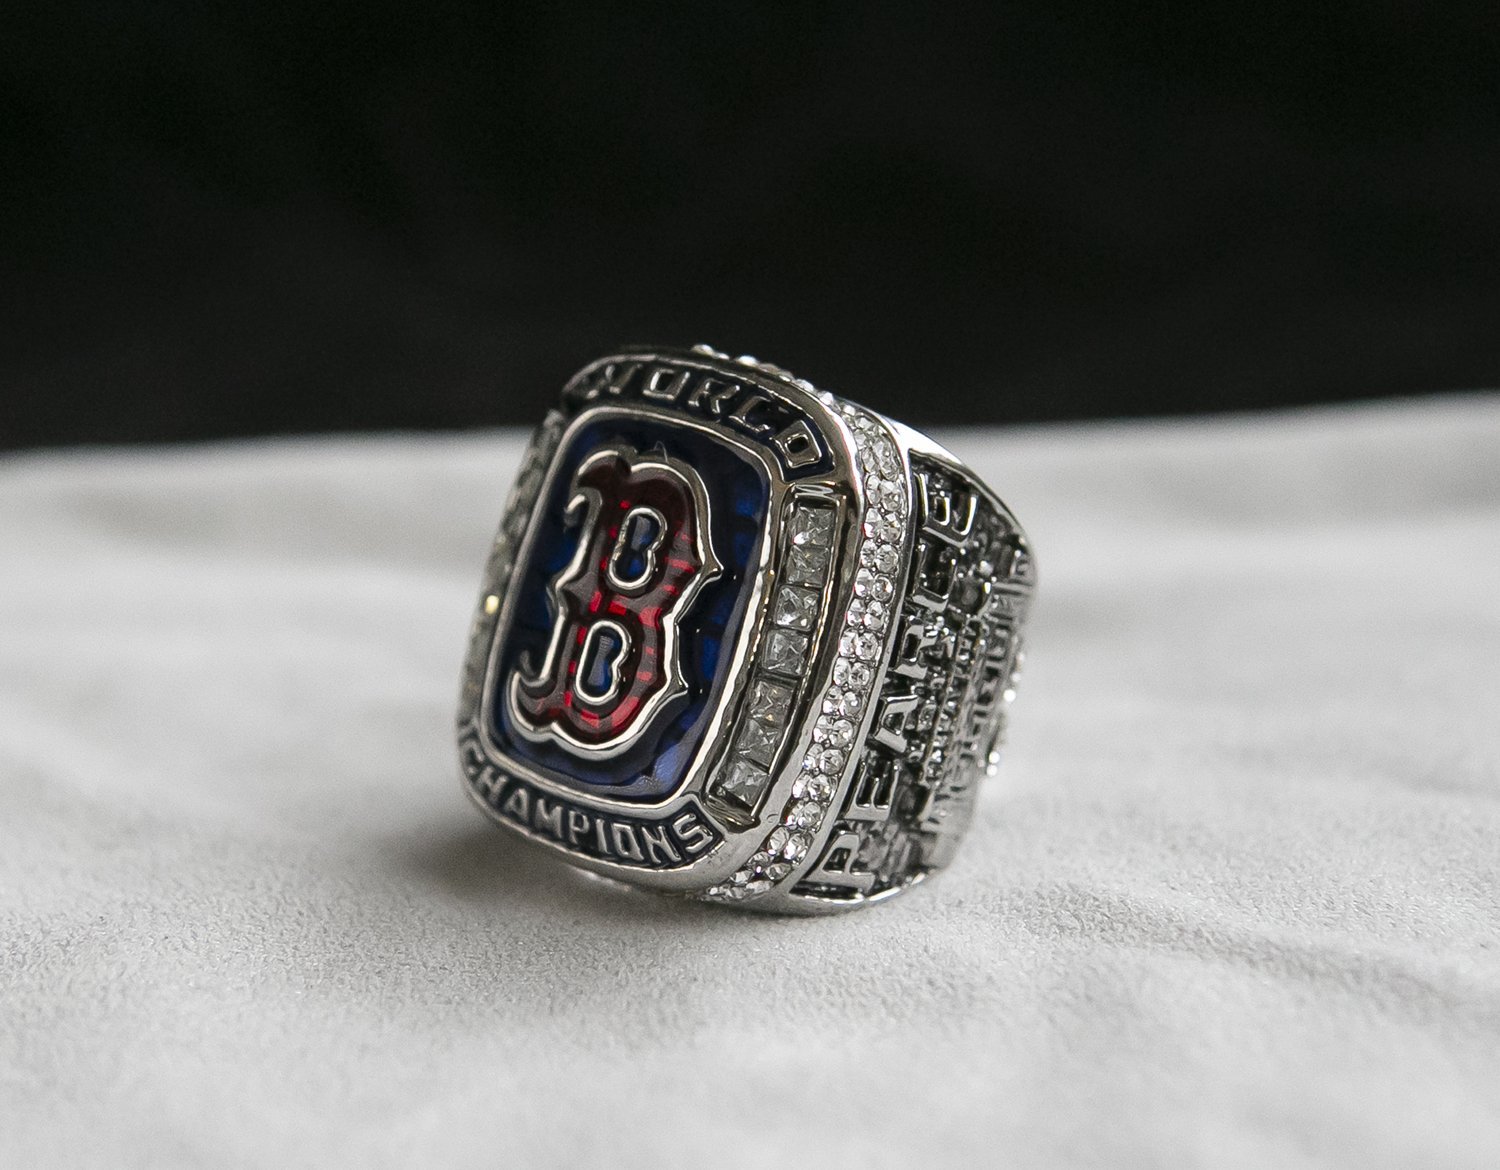 Boston Red Sox World Series Rings (2018) – Rings For Champs